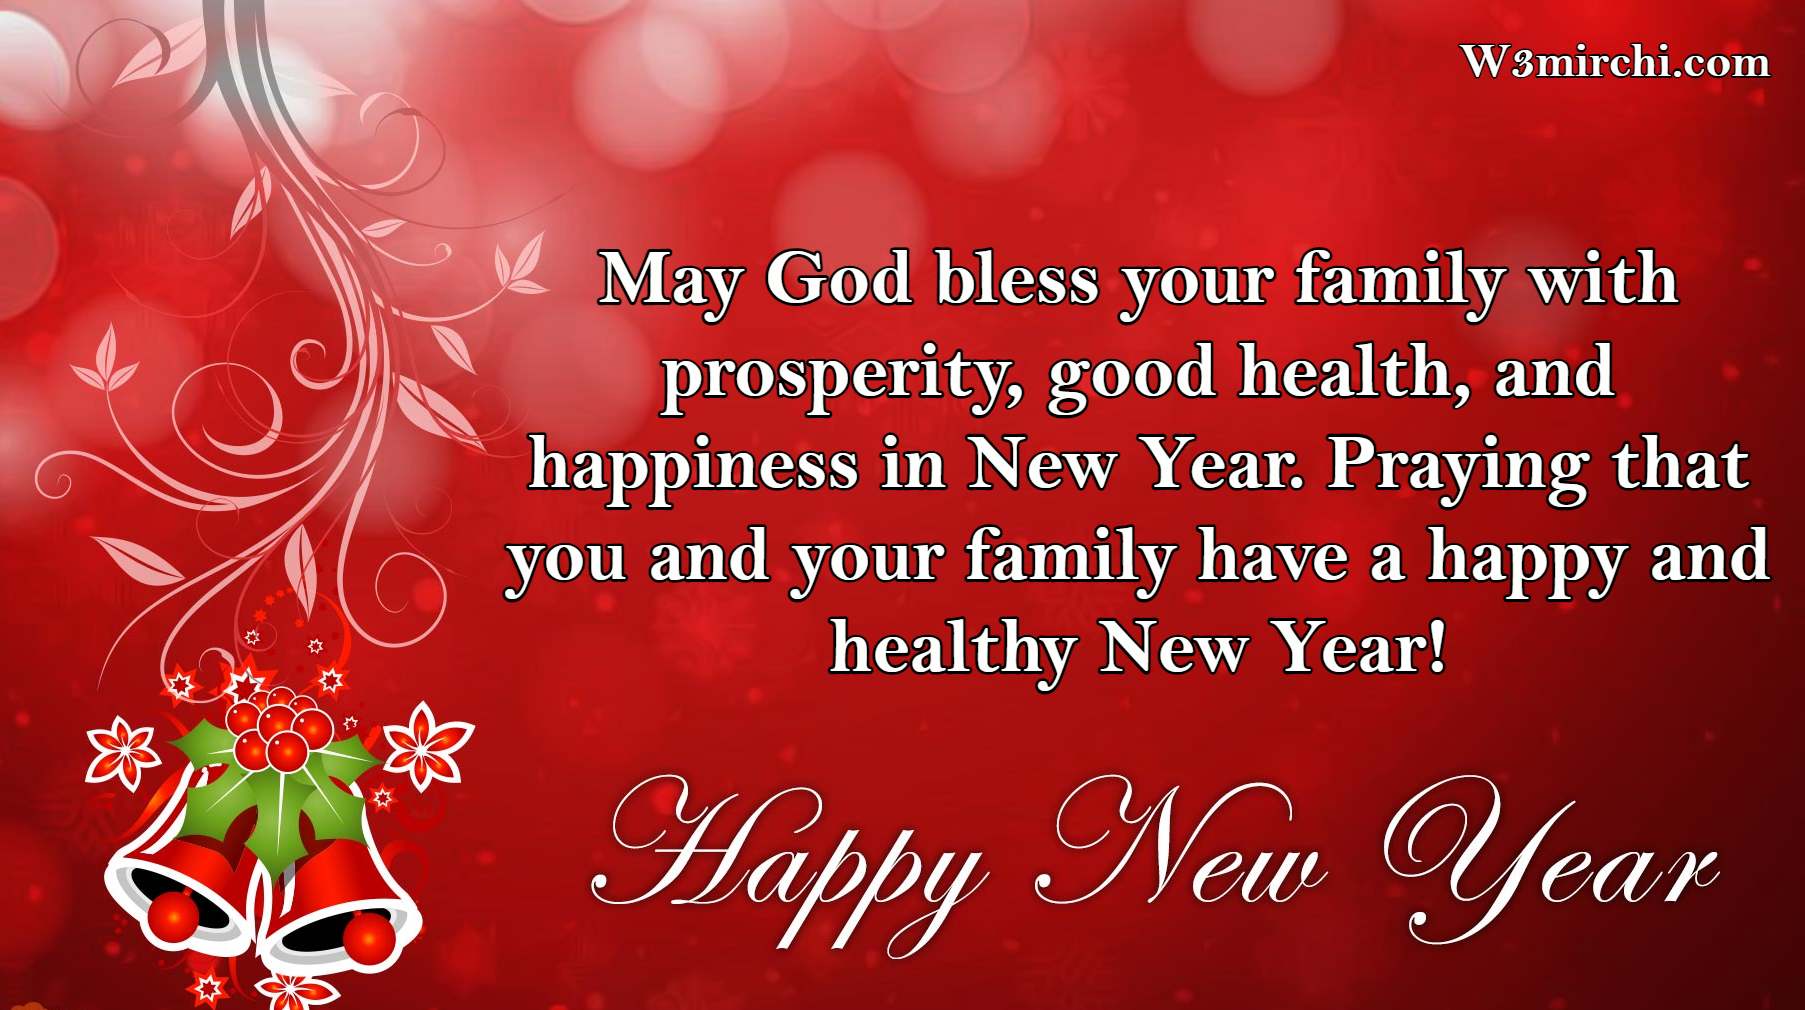 Happy and Healthy New Year!